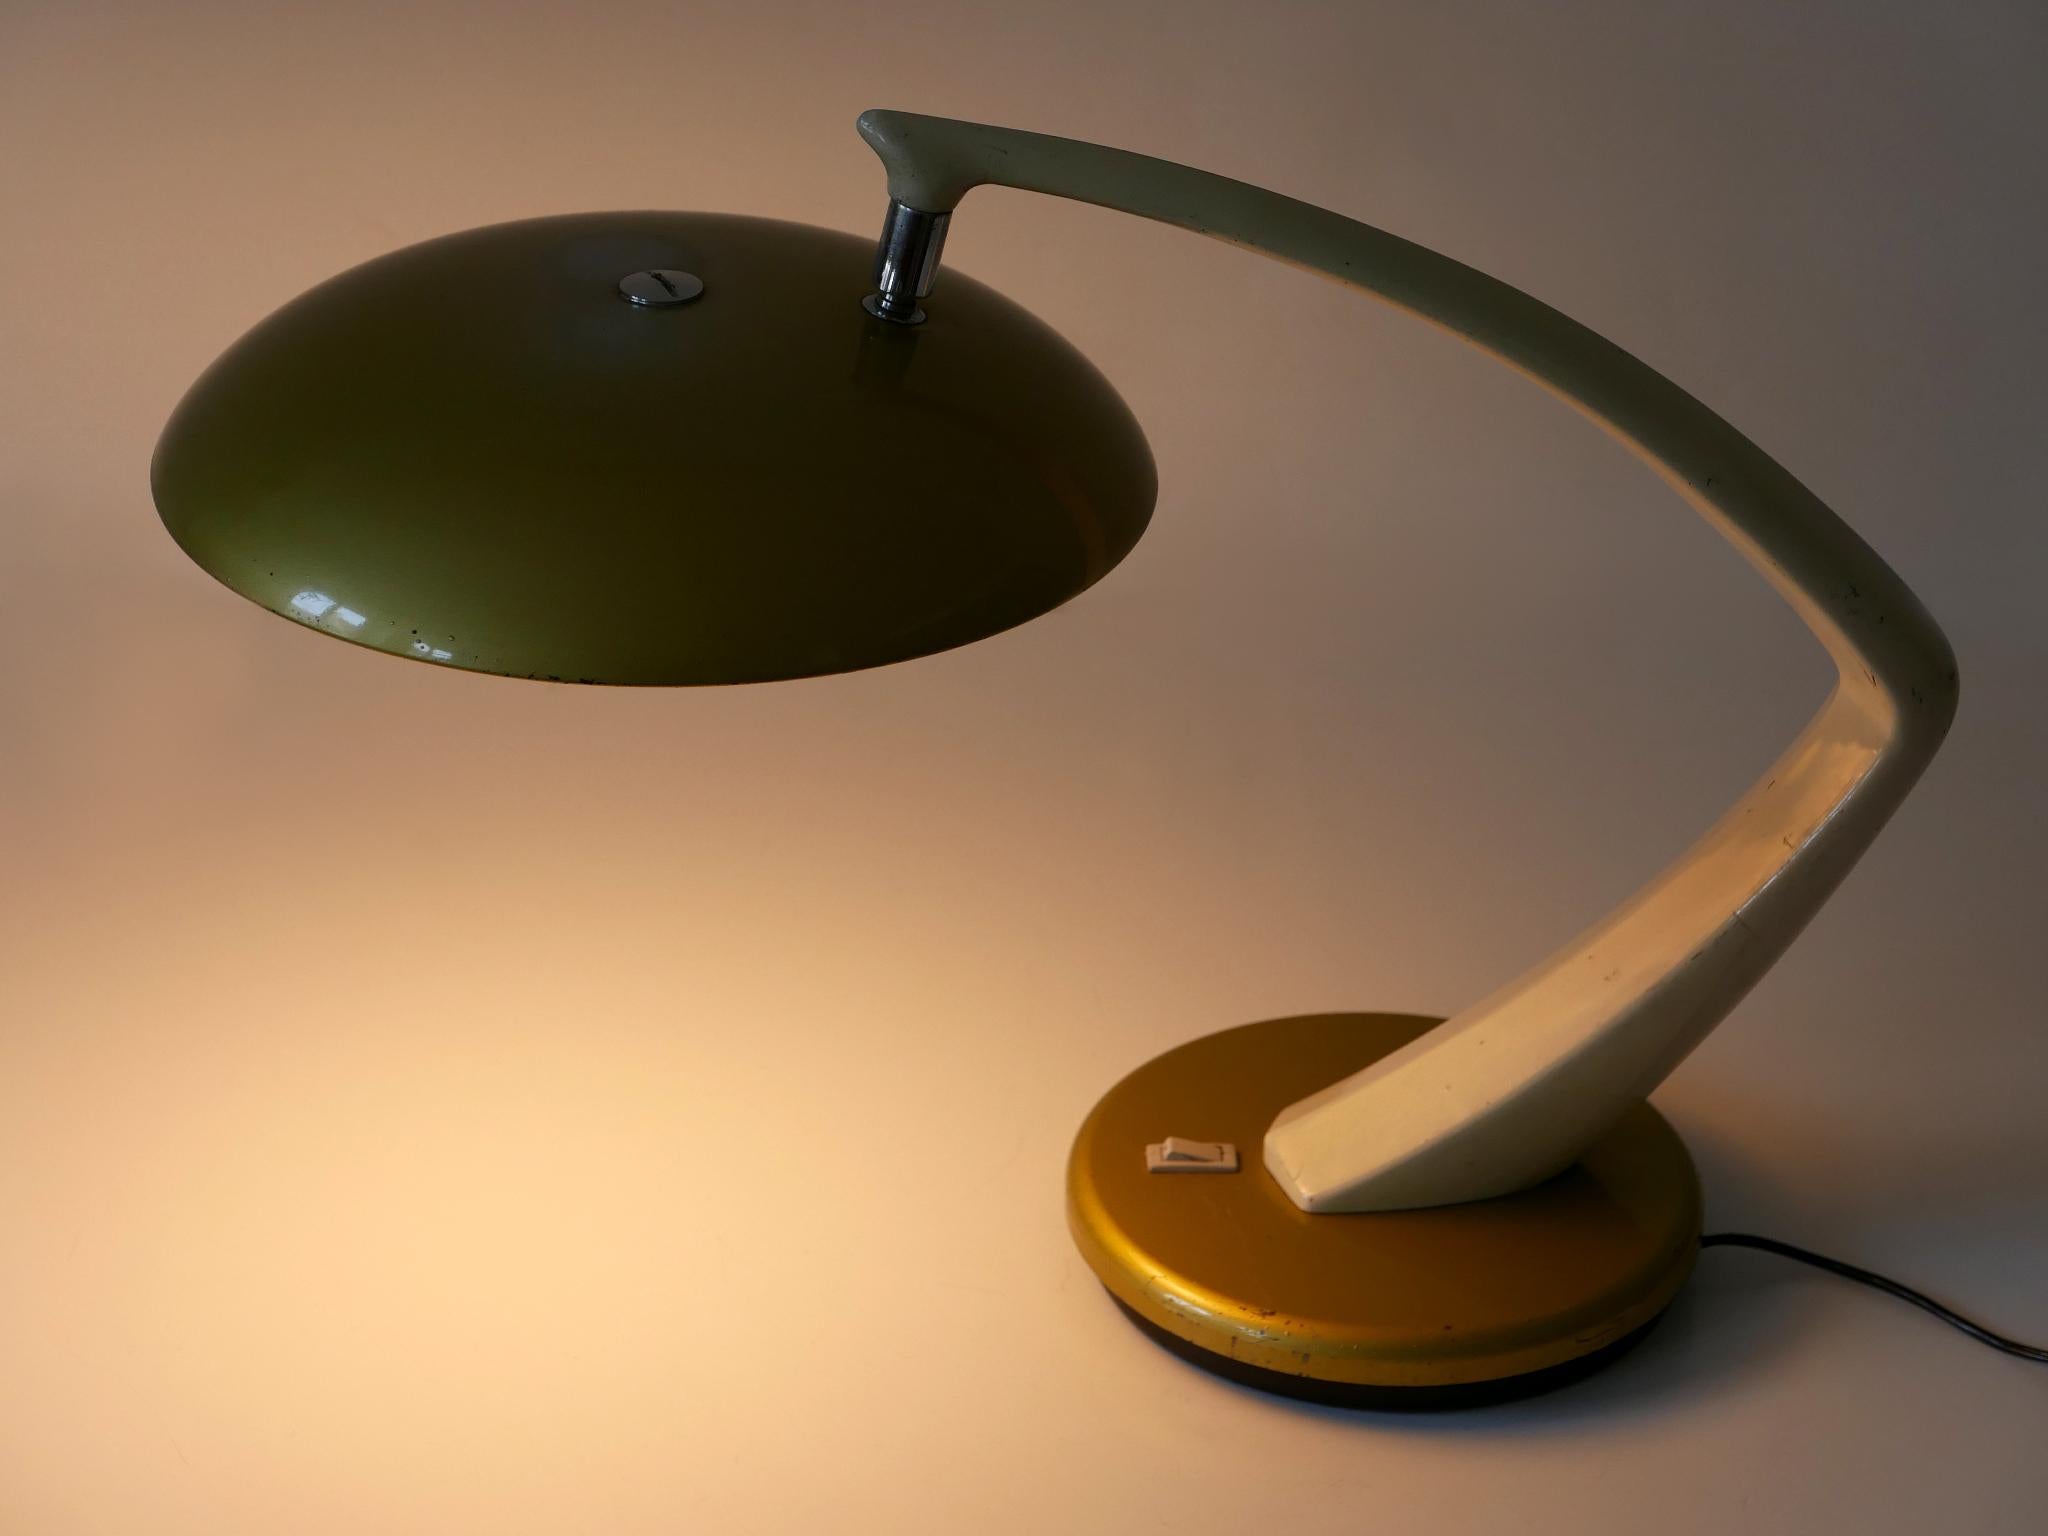 Elegant Mid Century Modern table lamp or desk light 'Boomerang 64' in gold and creme color. Lamp shade rotating. Designed & manufactured by Fase, Spain, 1960s.

Executed in gold and creme colored metal, the table lamp comes with 2 x E27 / E26 Edison